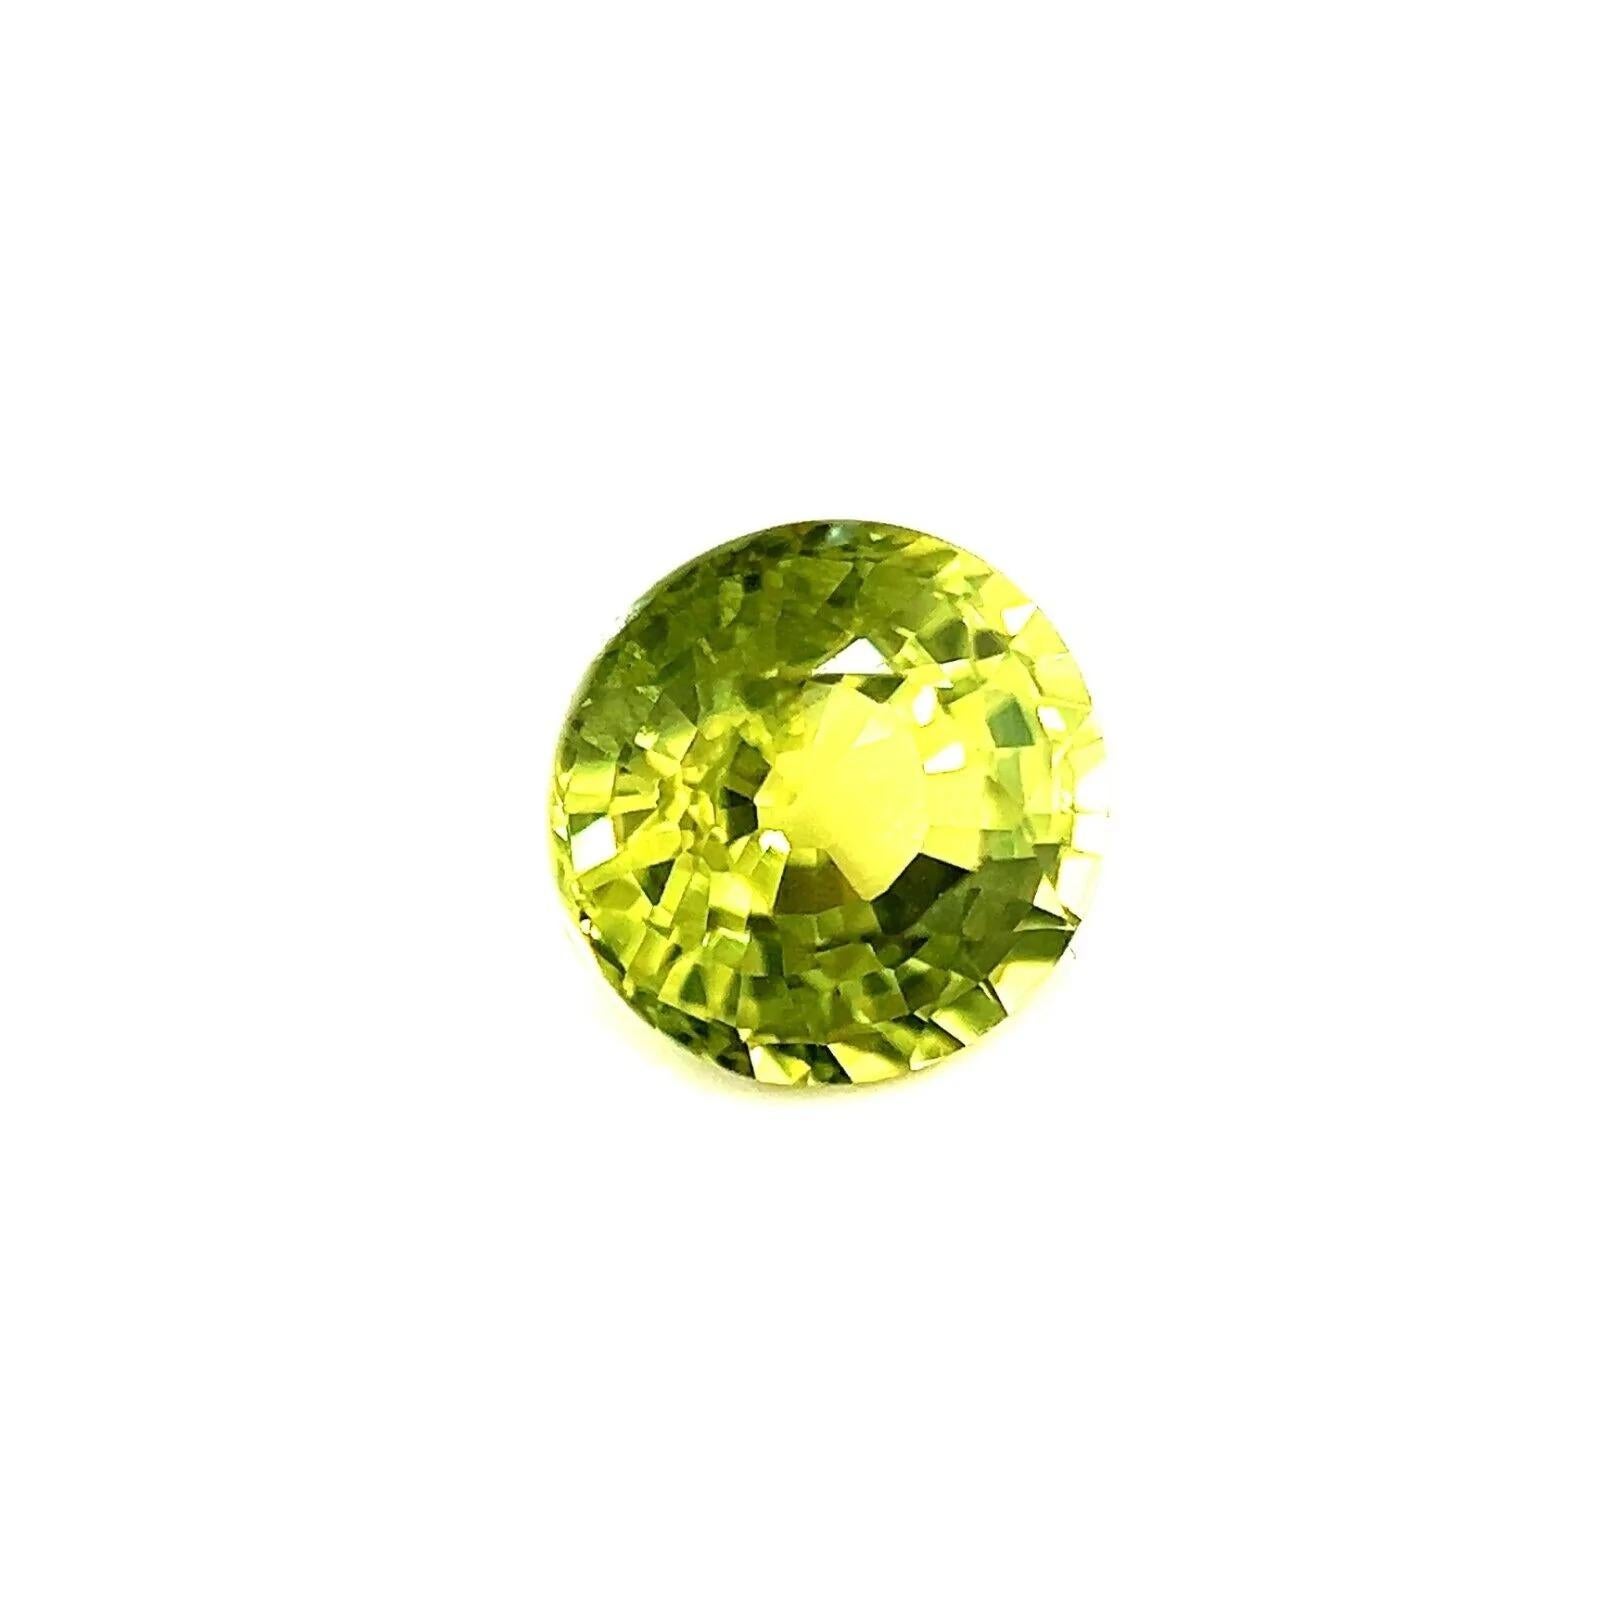 GIA Certified Green Yellow Sapphire 1.20ct Untreated Round Cut Unheated Rare

Rare Untreated VIVID Green Yellow Untreated Sapphire Gemstone. 
1.20 Carat unheated sapphire. Fully certified by GIA confirming stone as natural and untreated. Also has